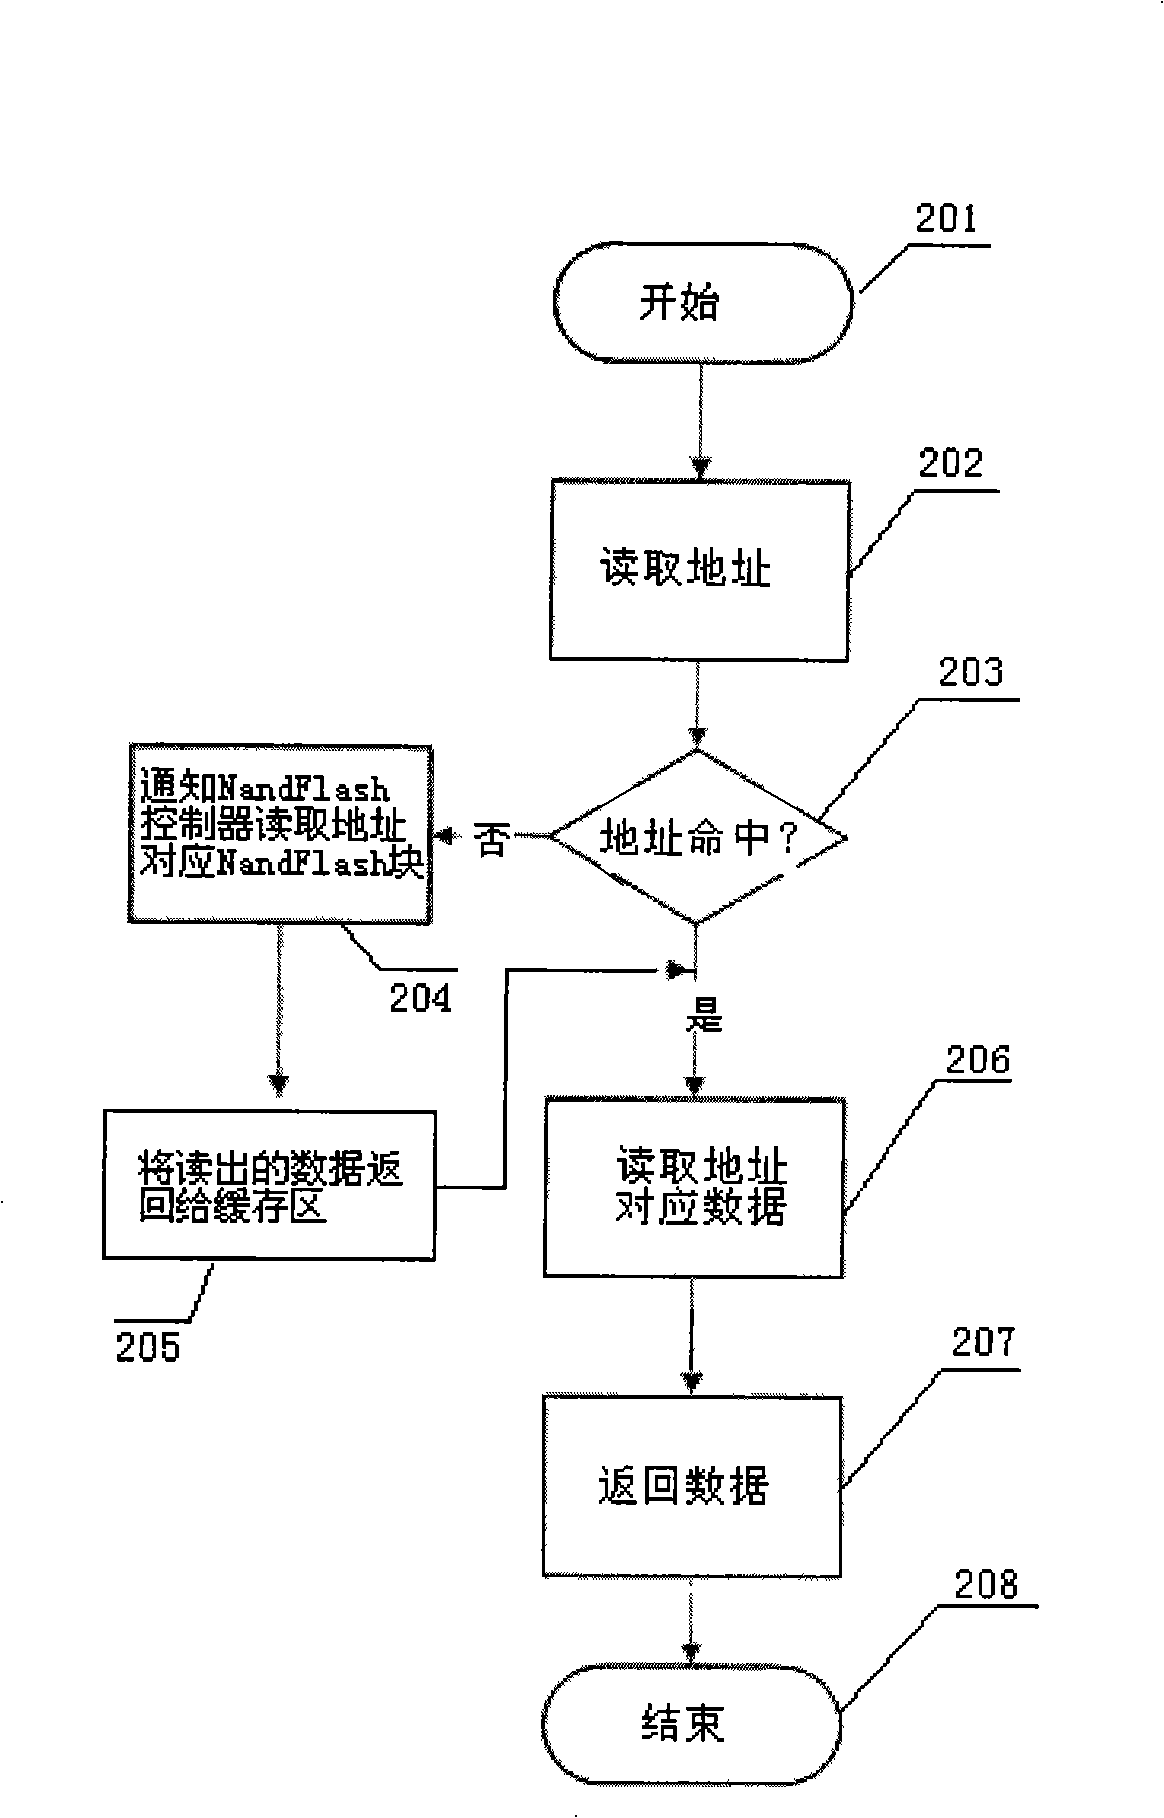 Device and method for embedded system expanding memory space